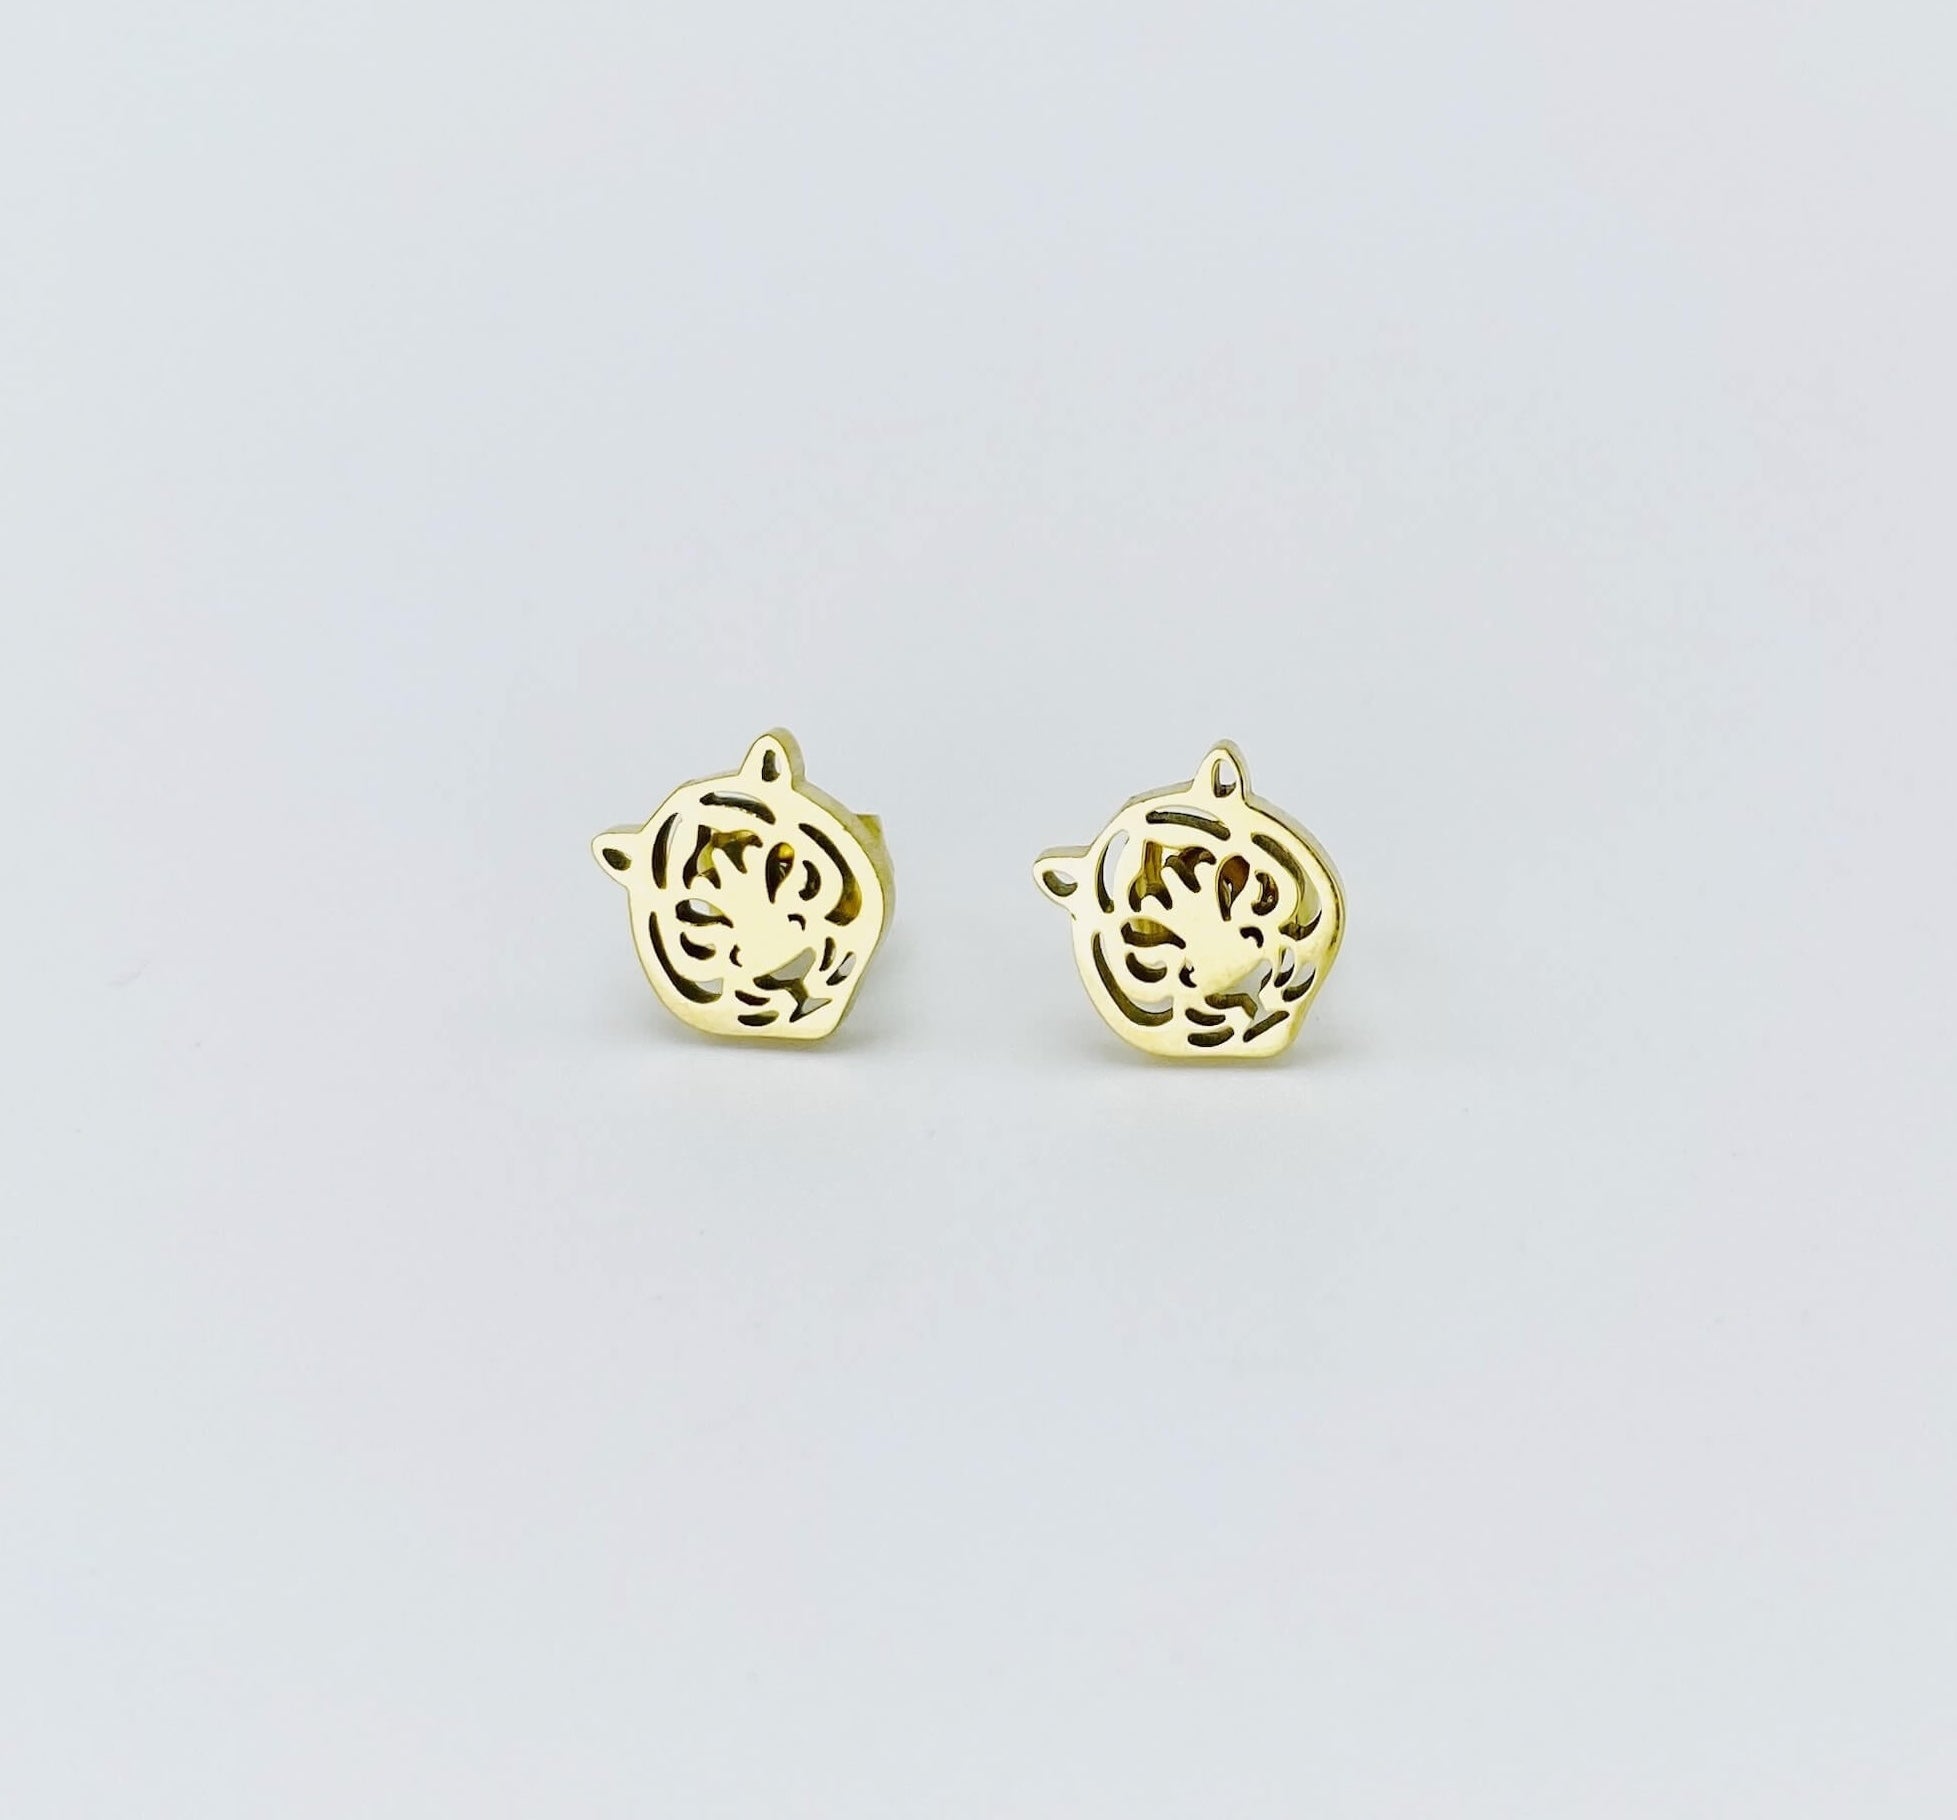 Metallic tiger stud earrings in a yellow gold hue made from stainless steel. 